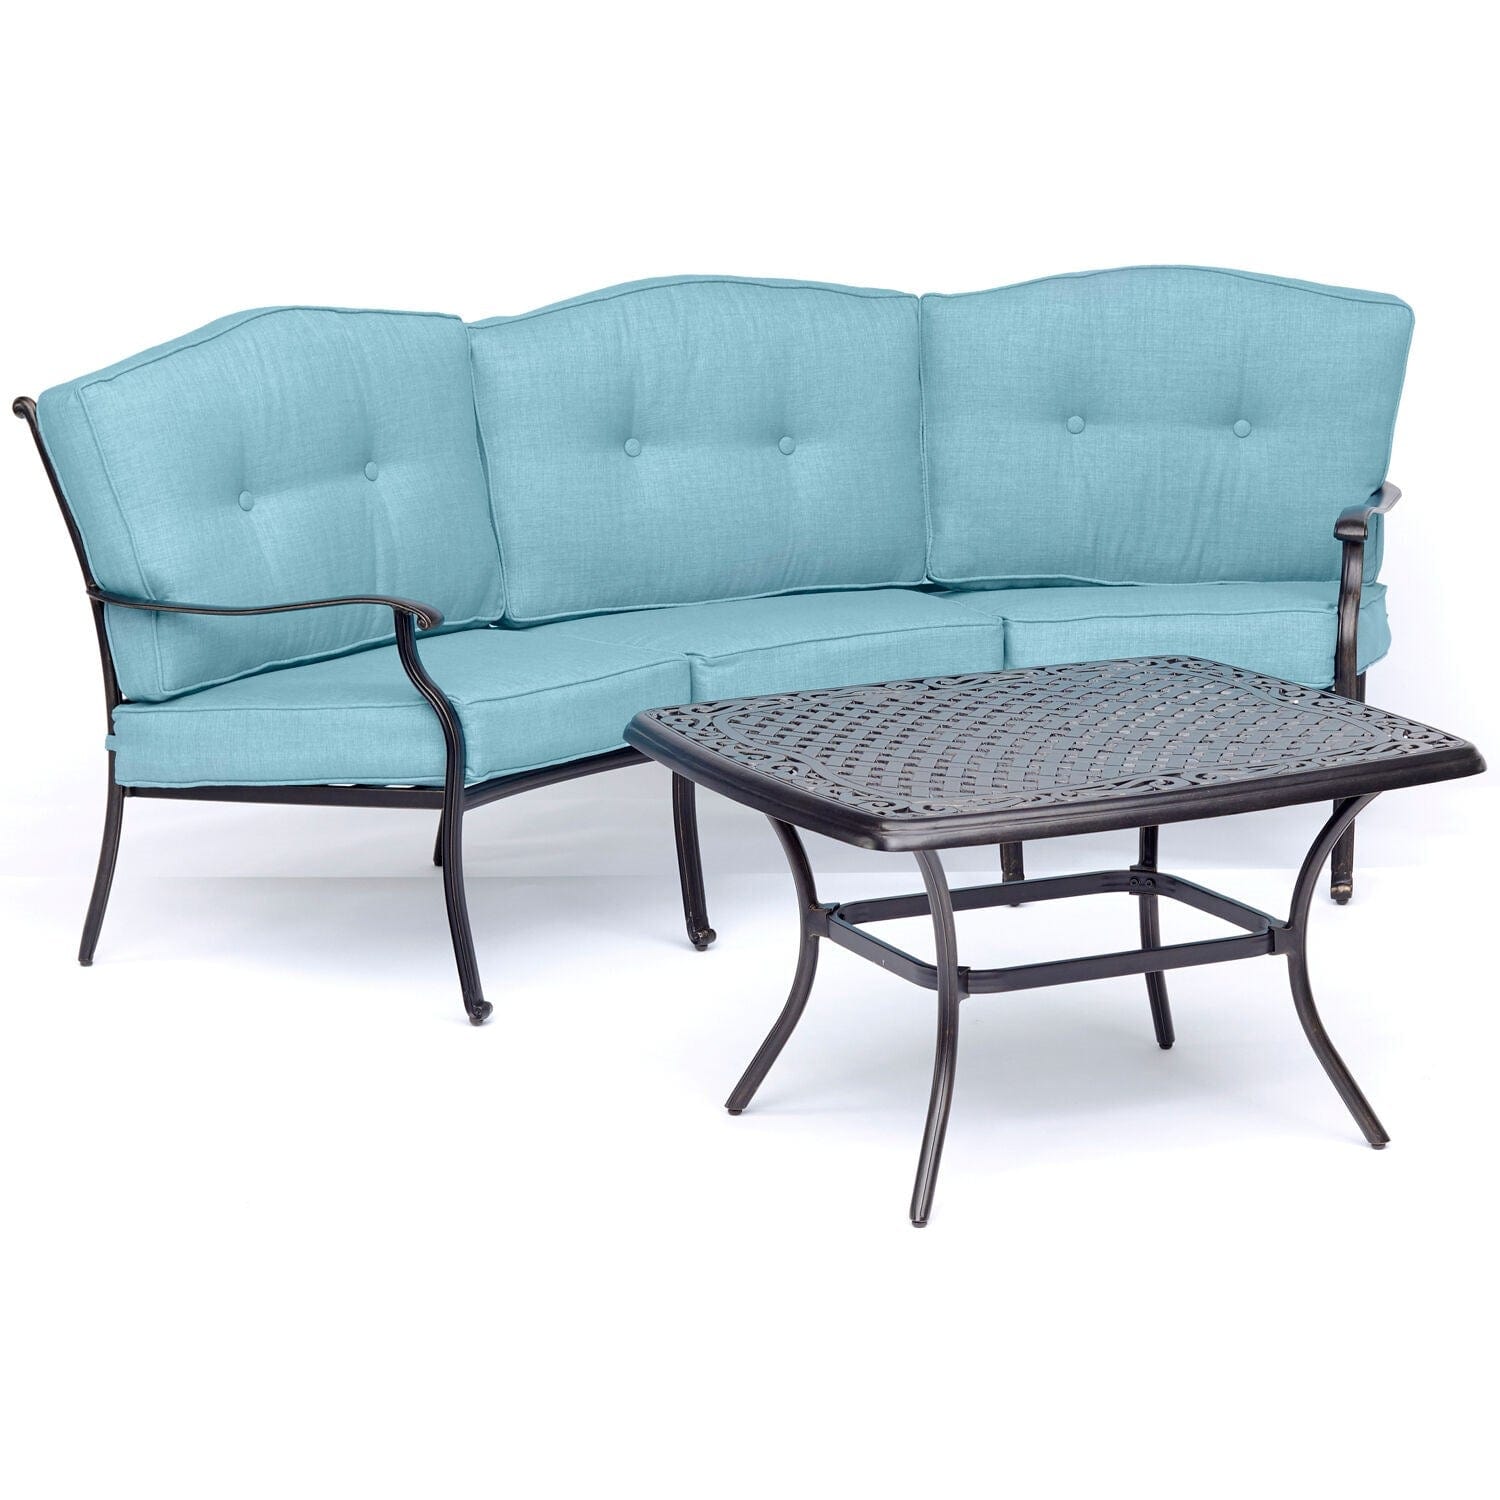 Hanover Conversation Set Hanover - Traditions 4-Piece Aluminum Patio Conversation Set with Blue Cushions, Cast-Top Coffee Table, Sofa and 2-Rockers | Blue/Bronze | TRAD4PCCT-BLU